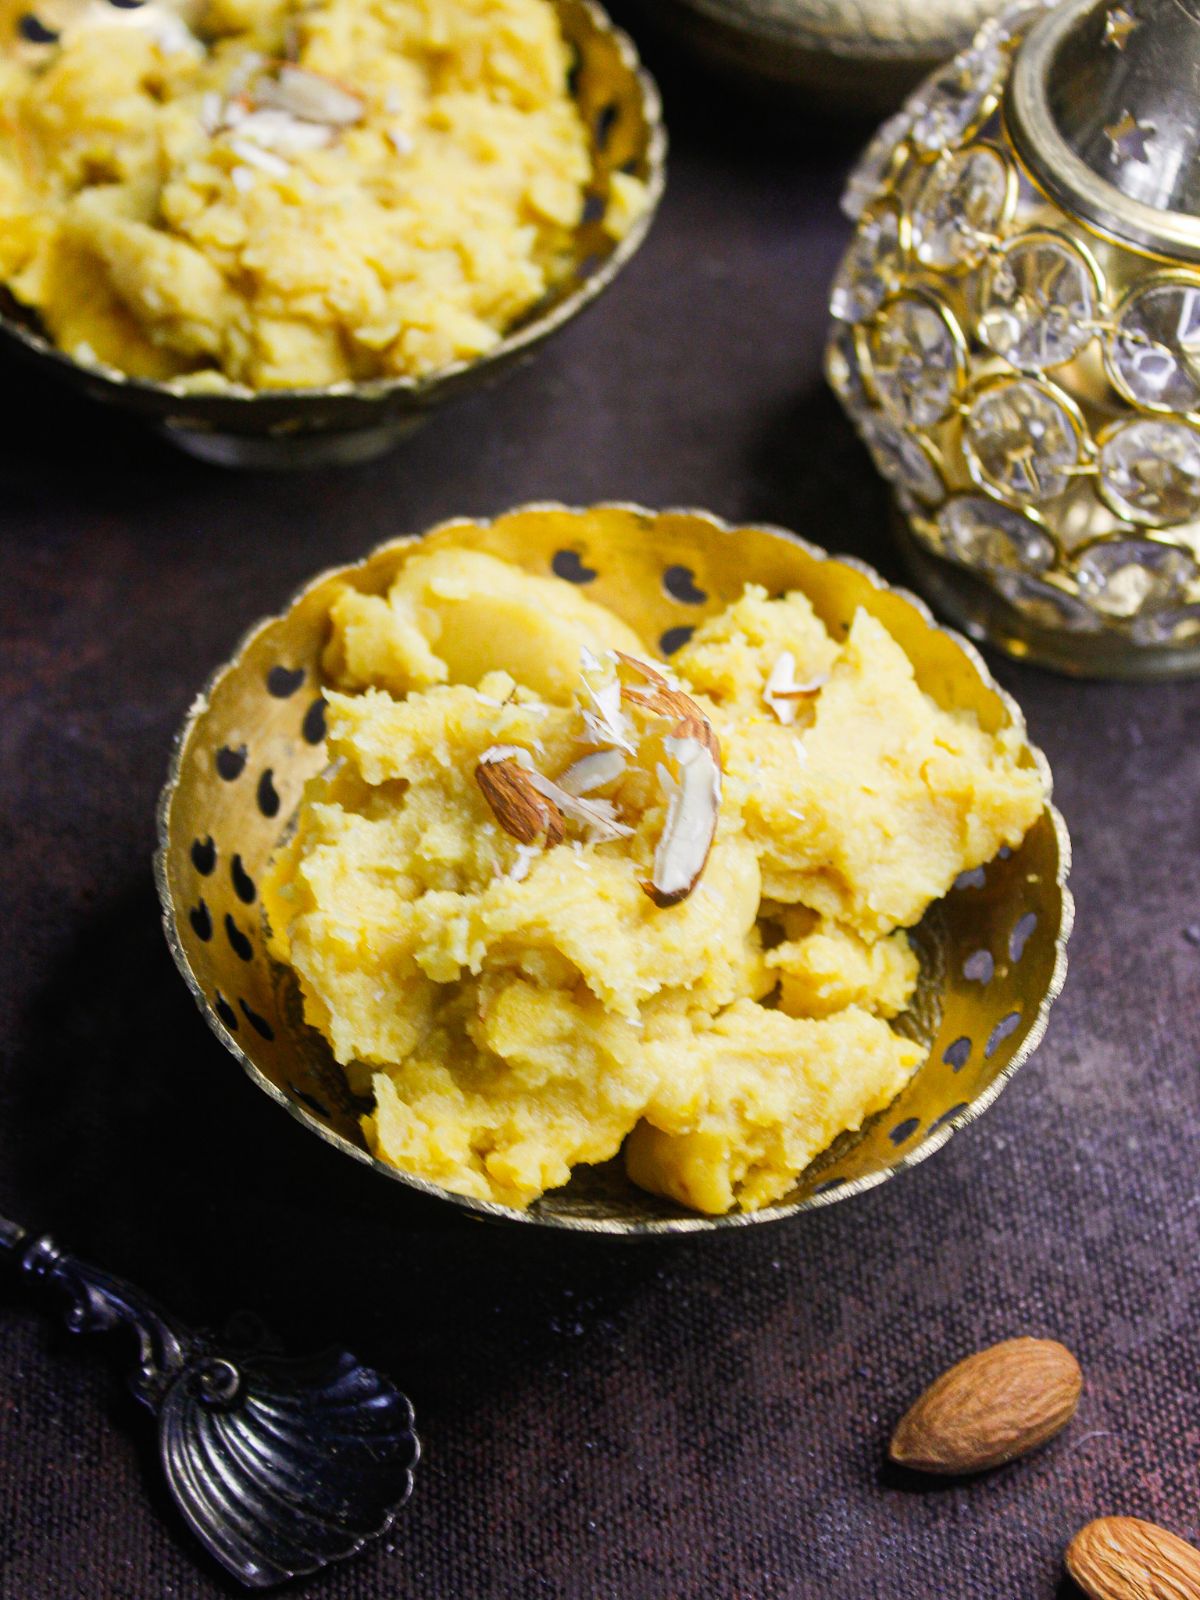 Besan Halwa: Rich Chickpea Flour Dessert decorated with almonds in the background